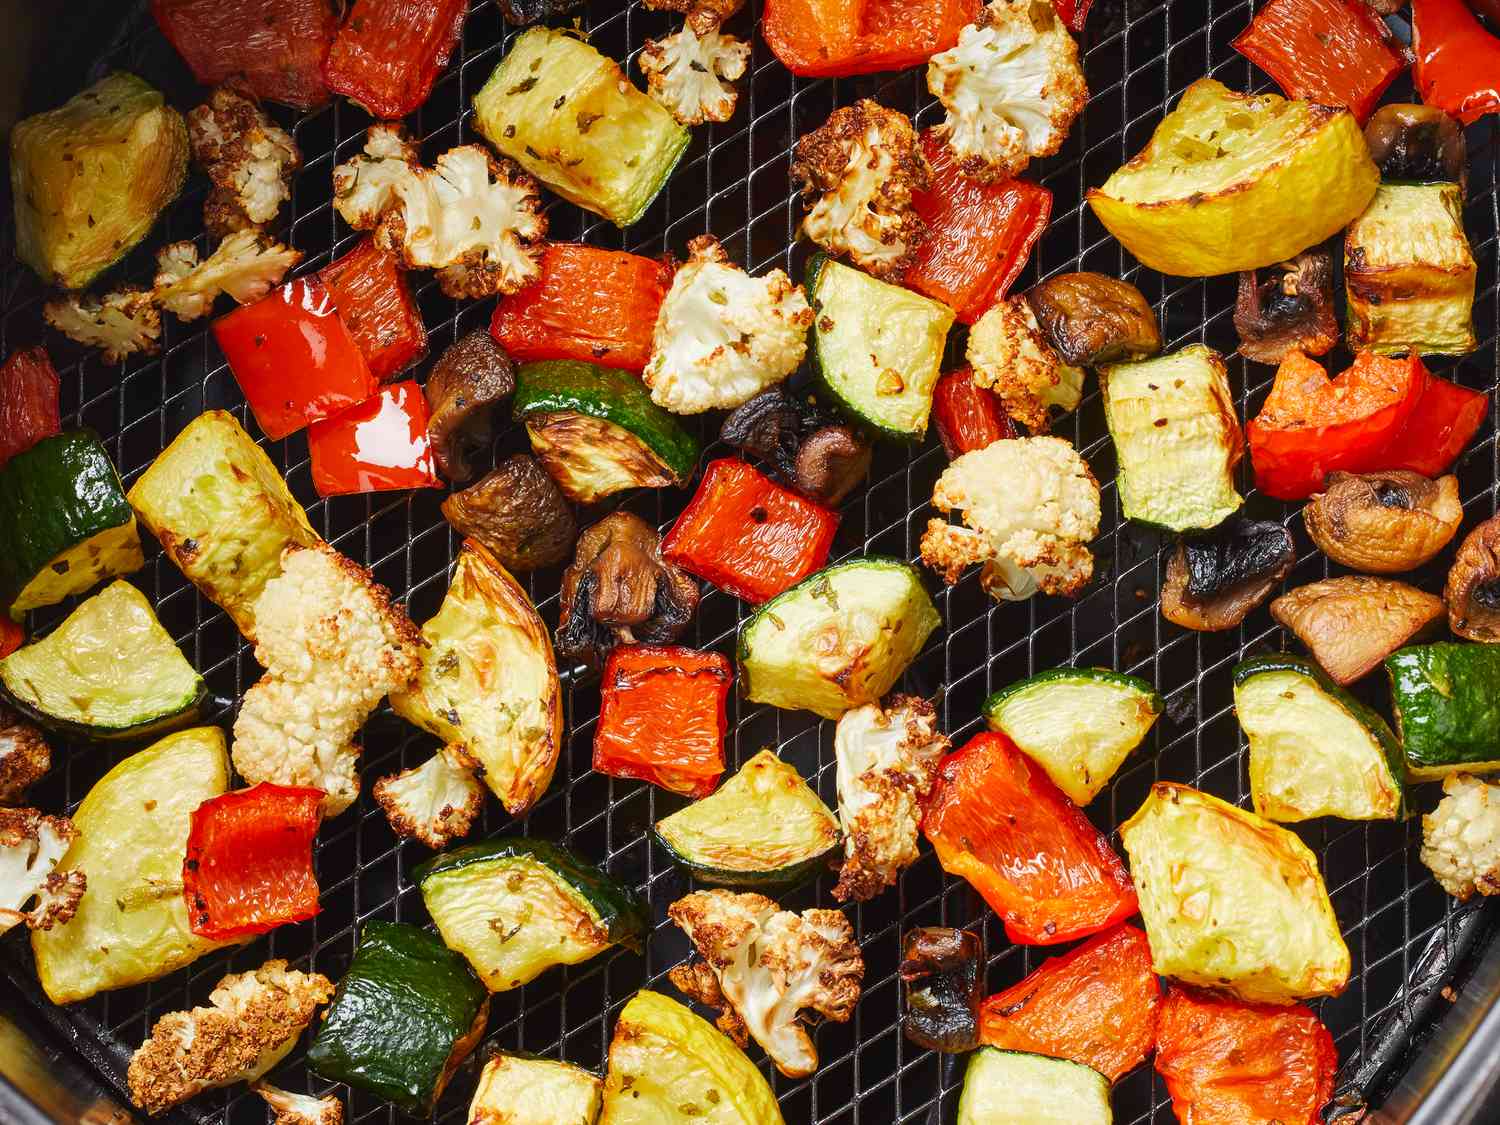 A close up view looking down on an air fryer tray of perfectly roasted vegetables.